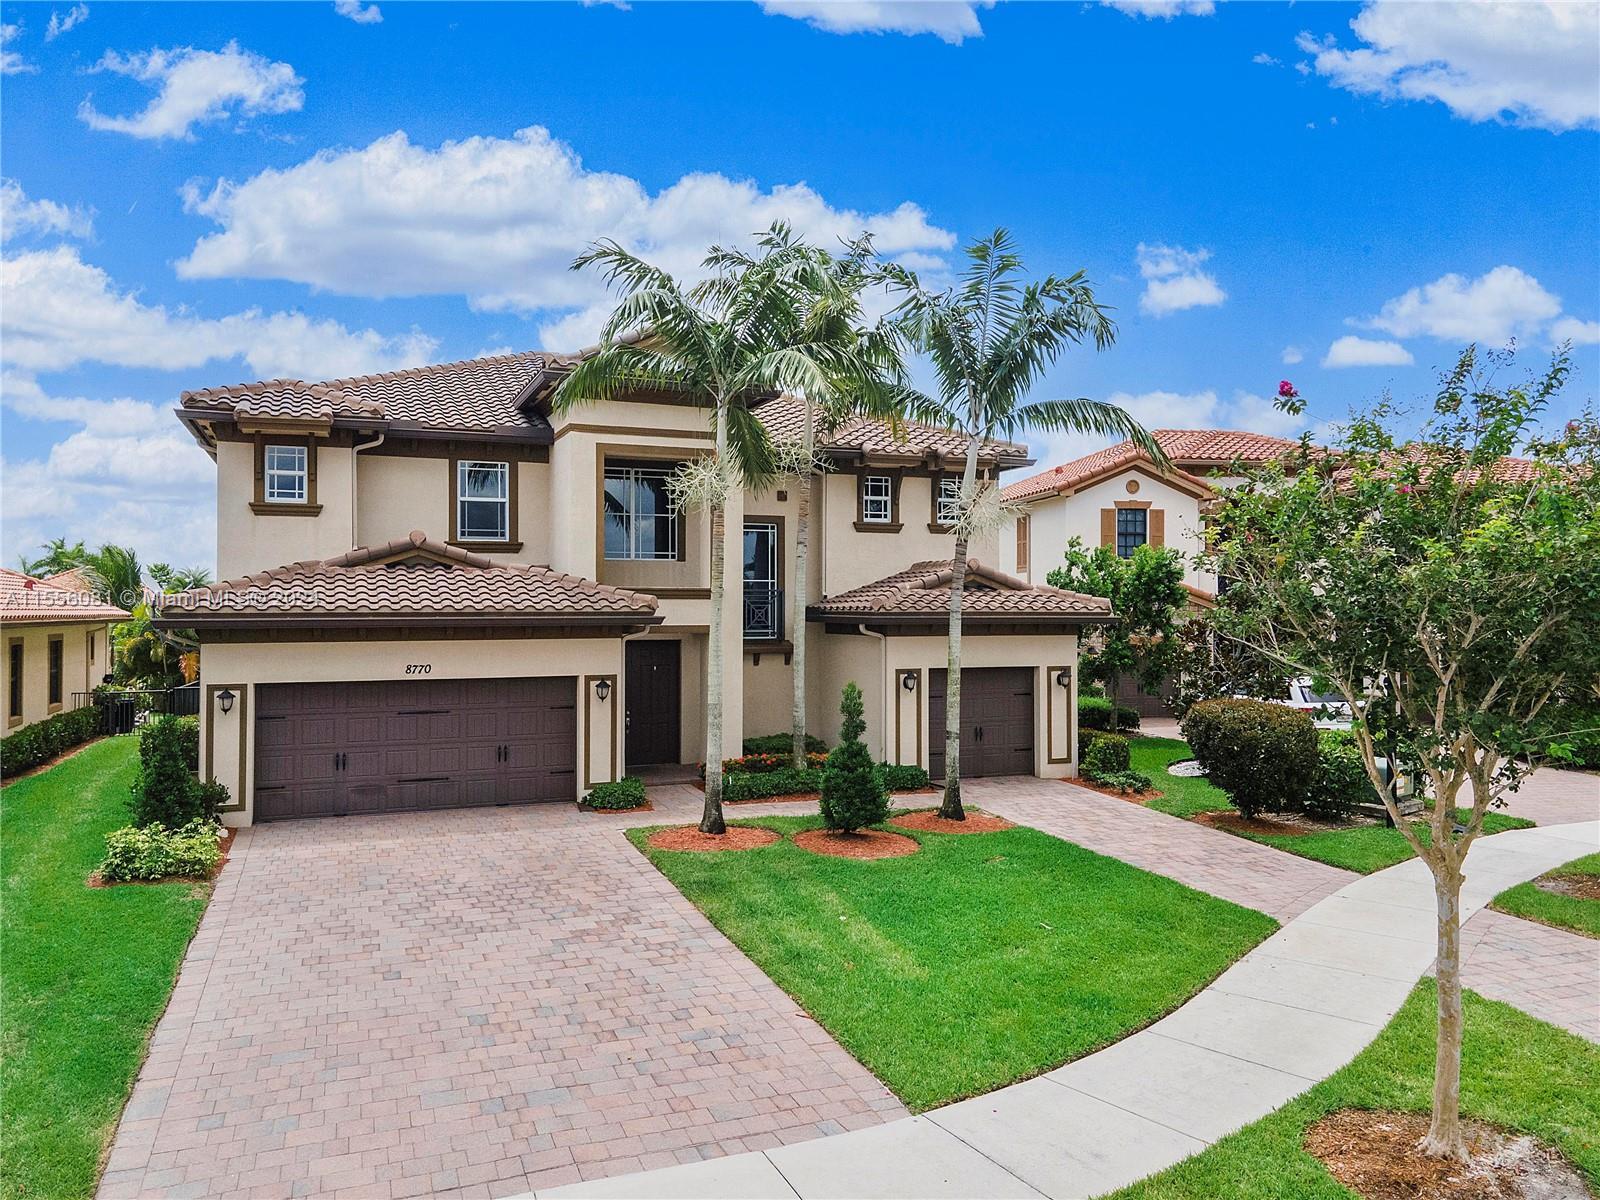 8770 Lakeview Dr, Parkland, Broward County, Florida - 6 Bedrooms  
7 Bathrooms - 